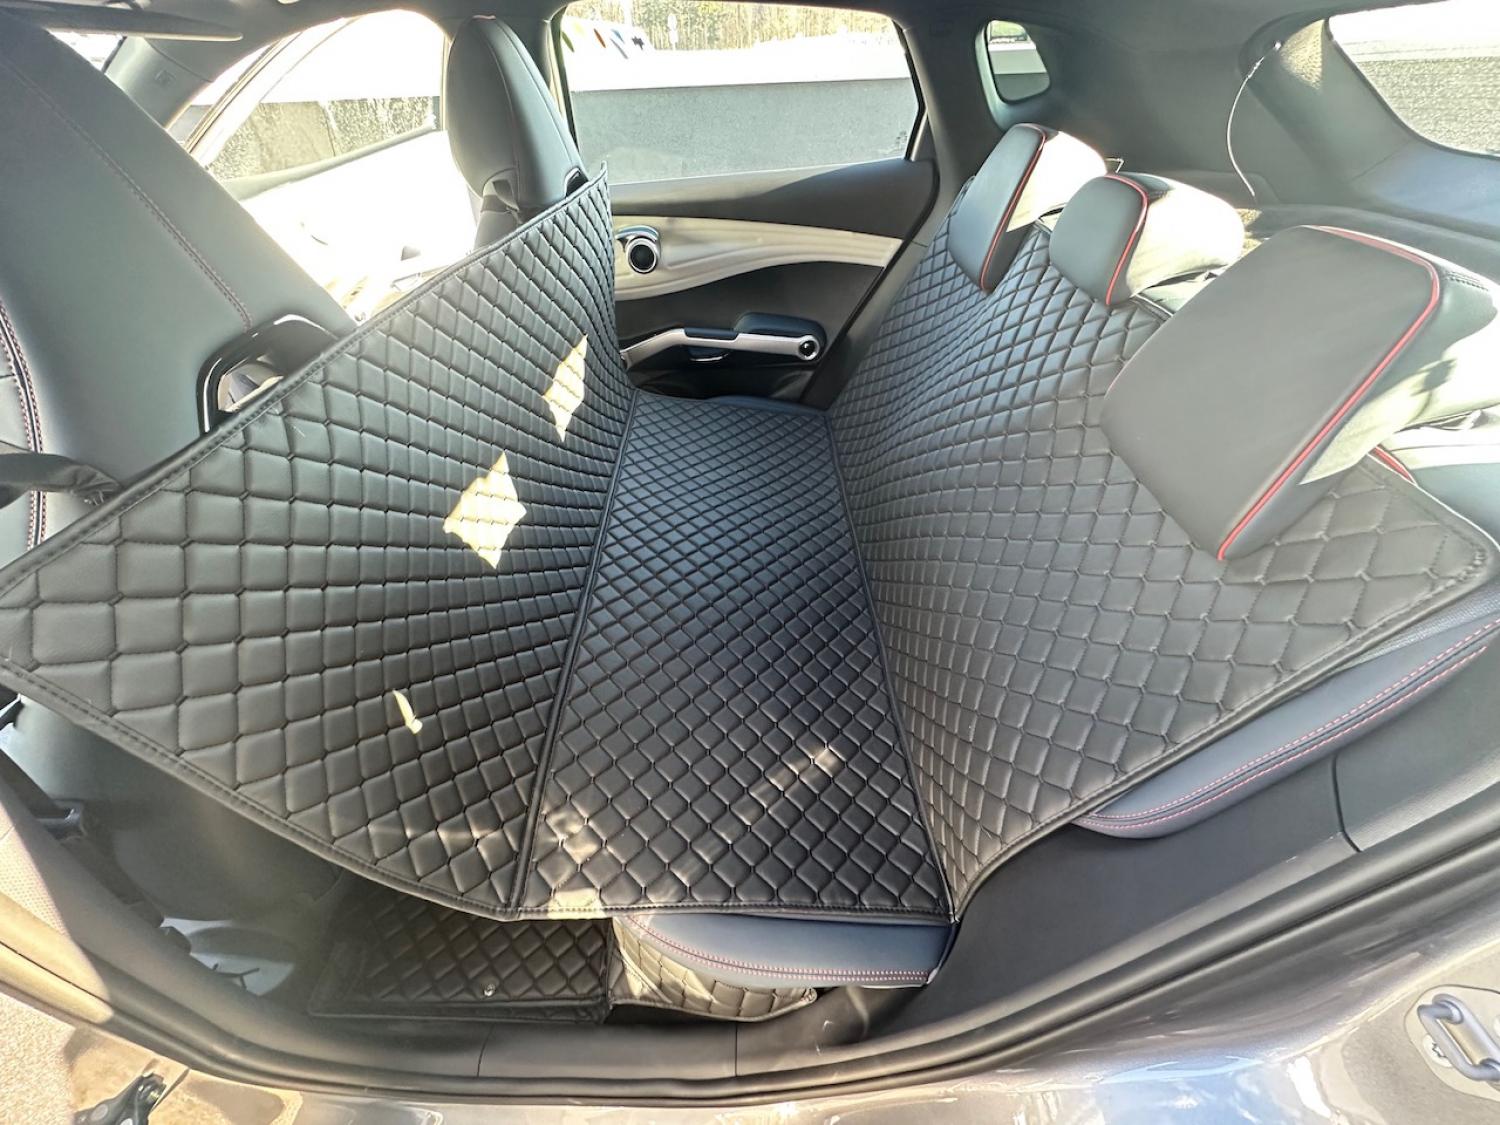 CARSTYLER® Back Seat Cover Geeignet Für Audi A7 C7 2010-2018